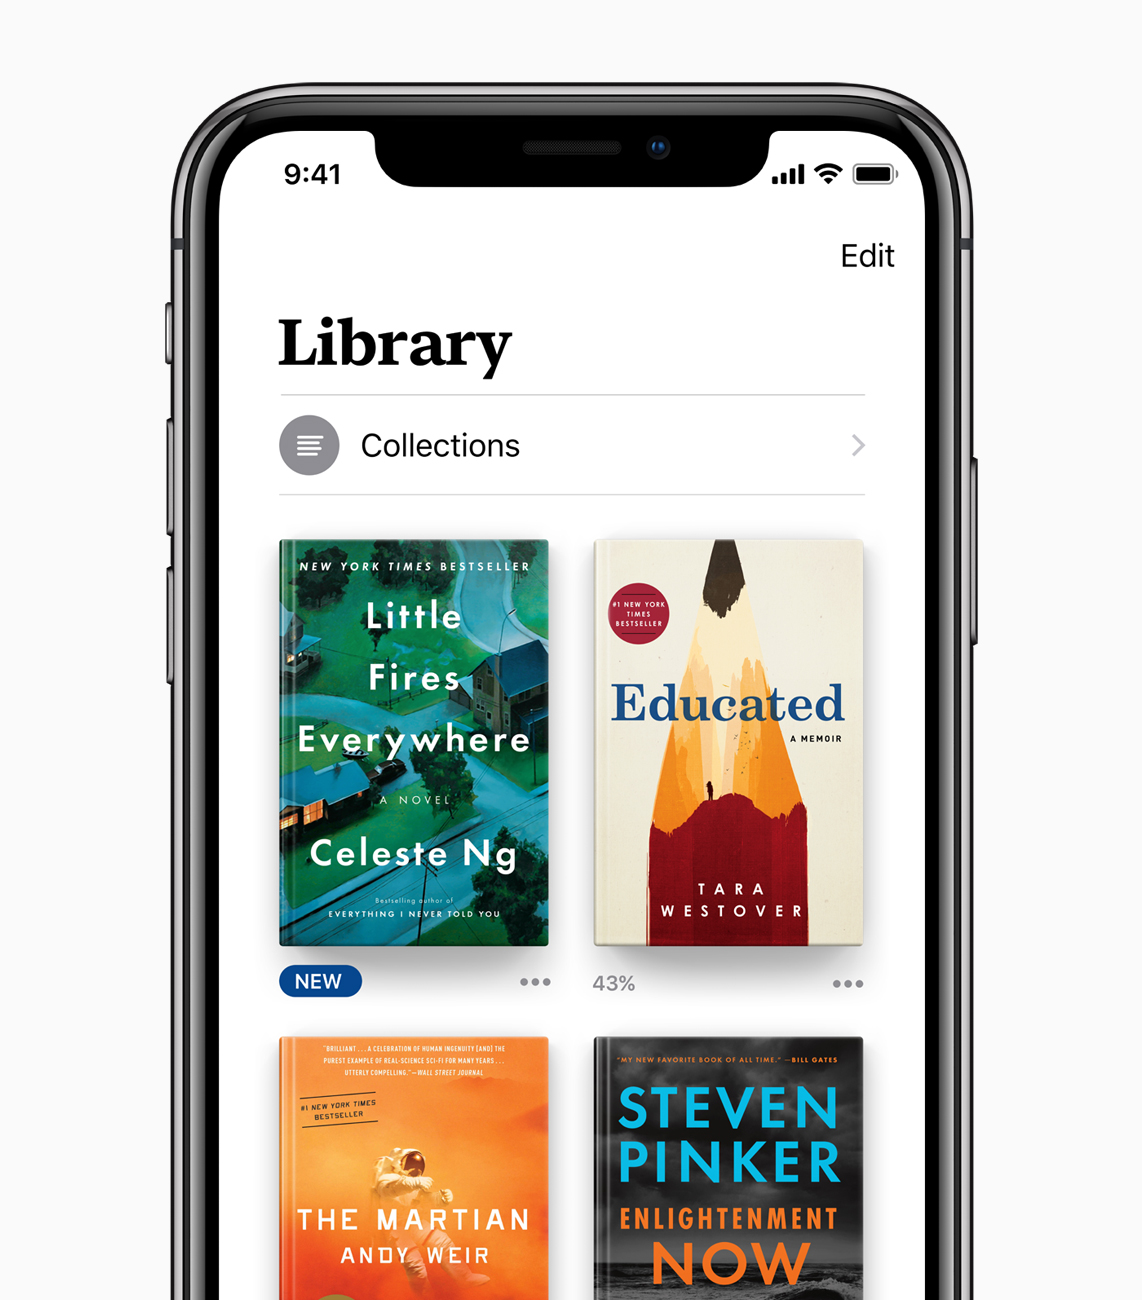 Apple Shares Preview of New Books App Coming in iOS 12 [Images]